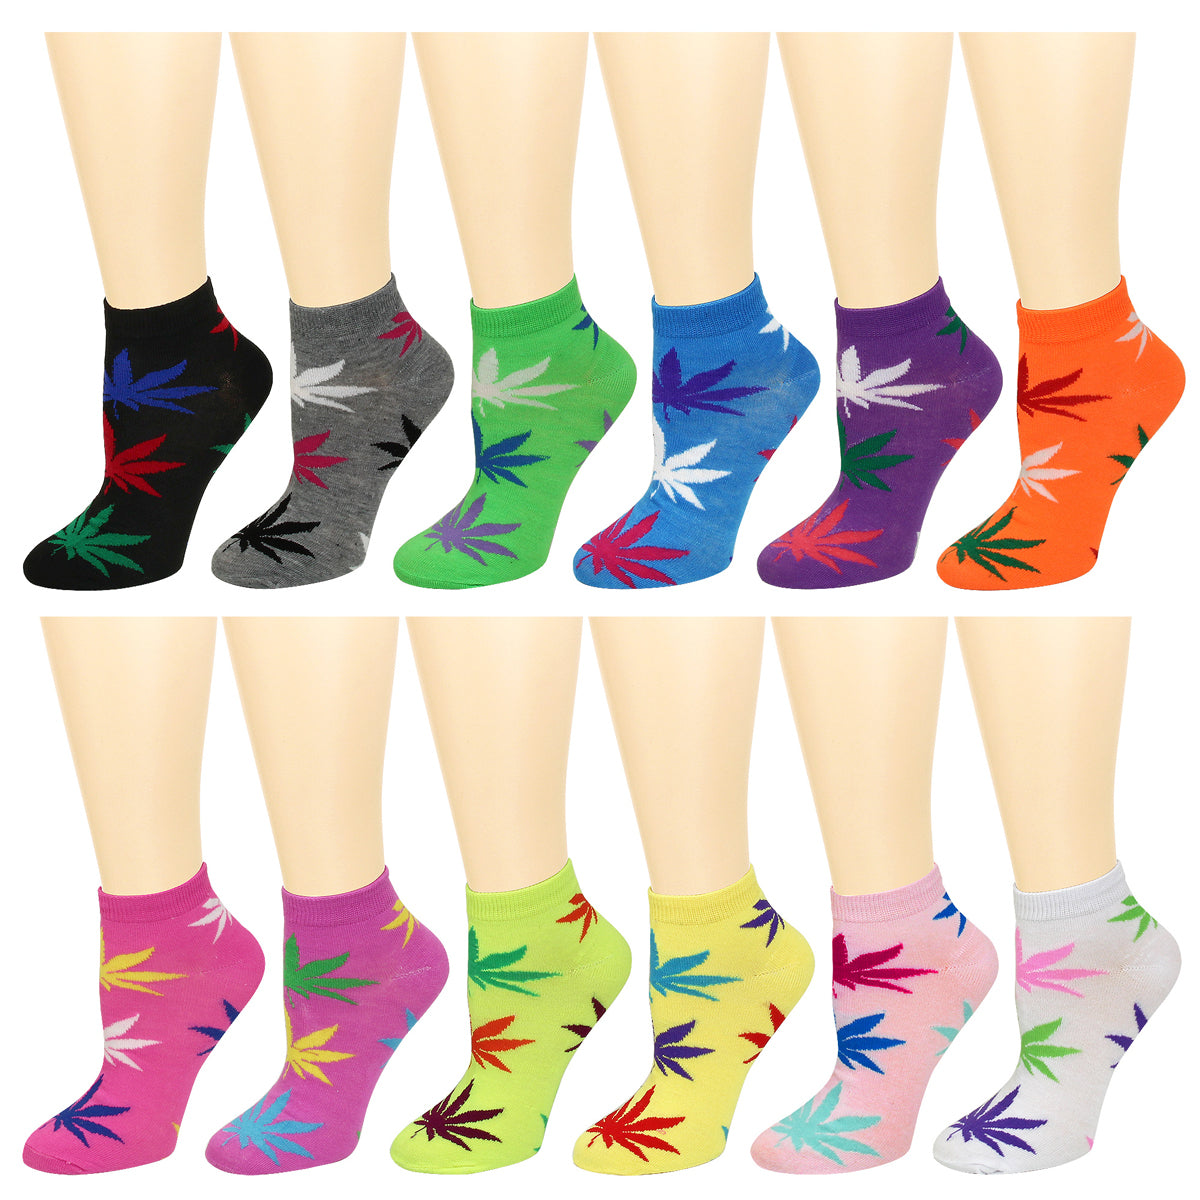  Falari 12 Pairs Women Ankle Socks Colorful ComfortSoft  Lightweight Sports Athletic Socks (12 Assorted Musical Note) : Falari:  Clothing, Shoes & Jewelry